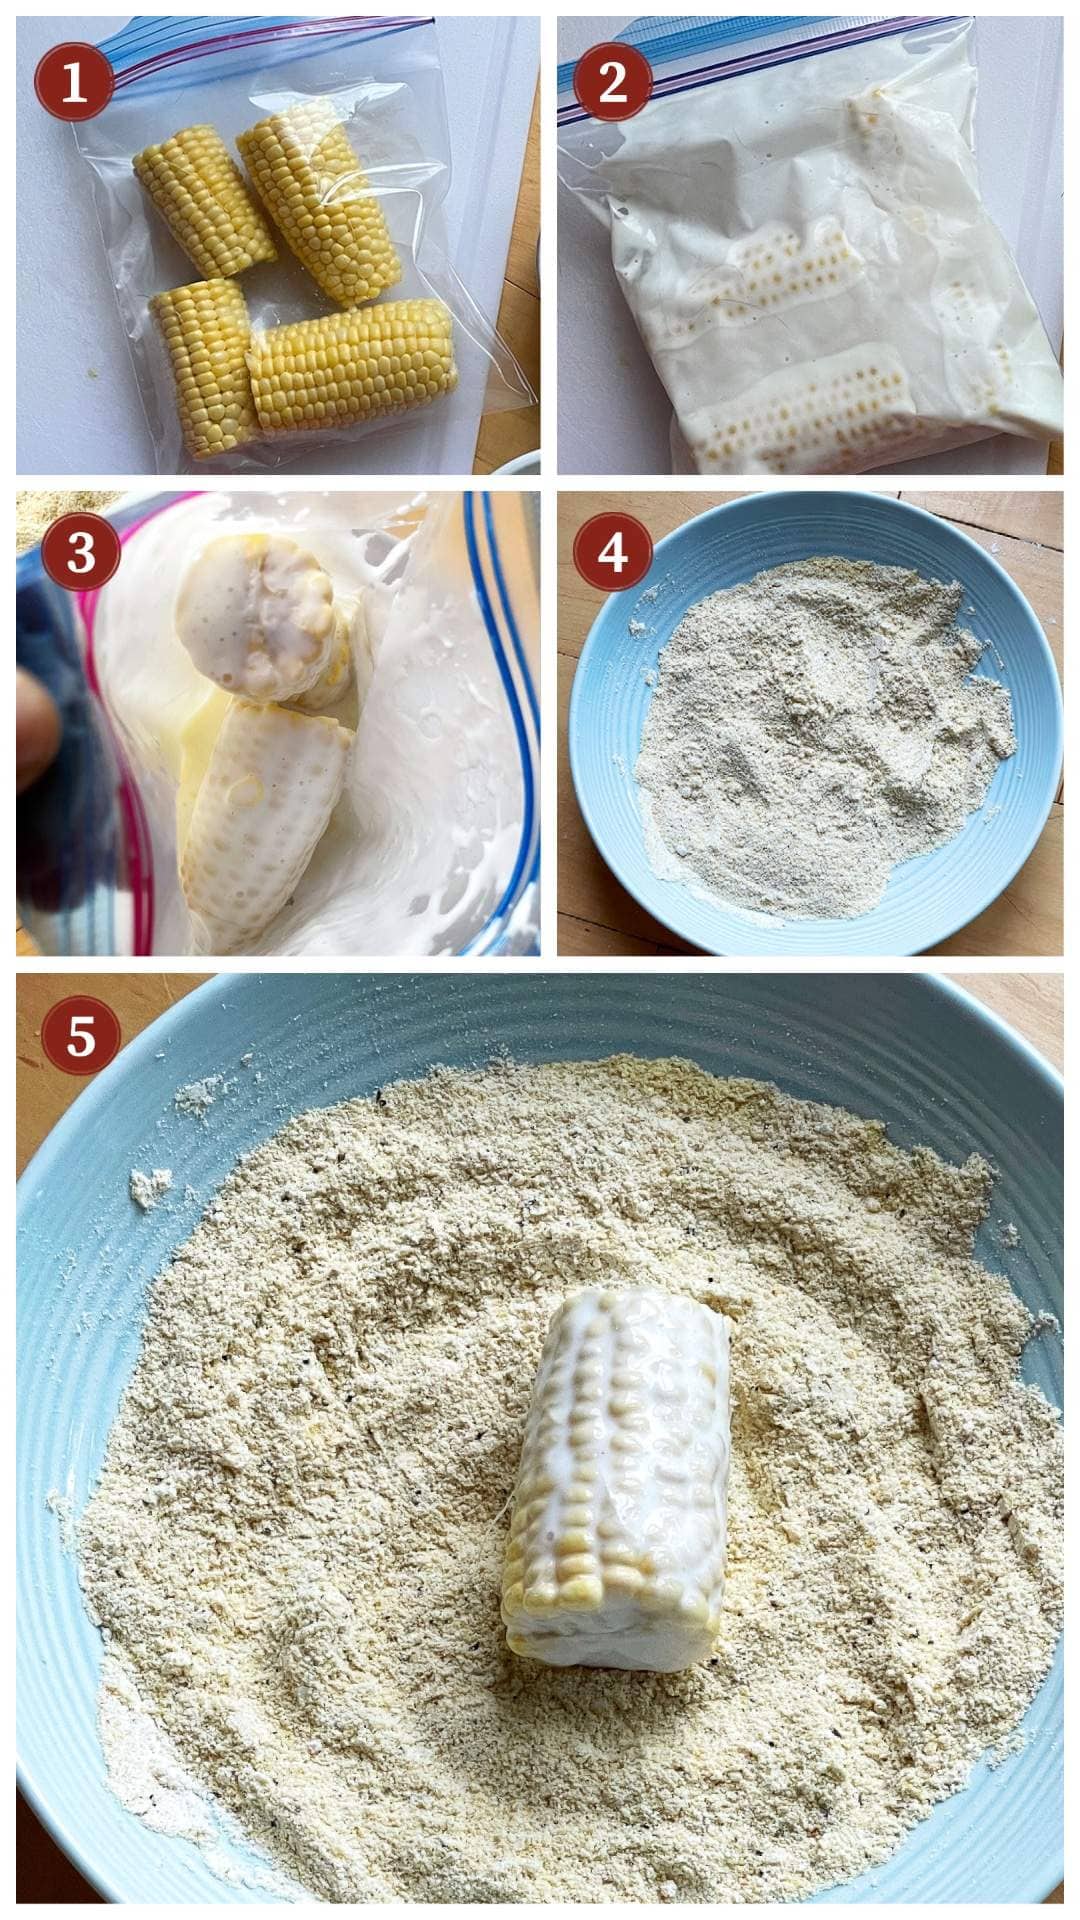 A collage of images showing how to make fried corn on the cob, steps 1-5.